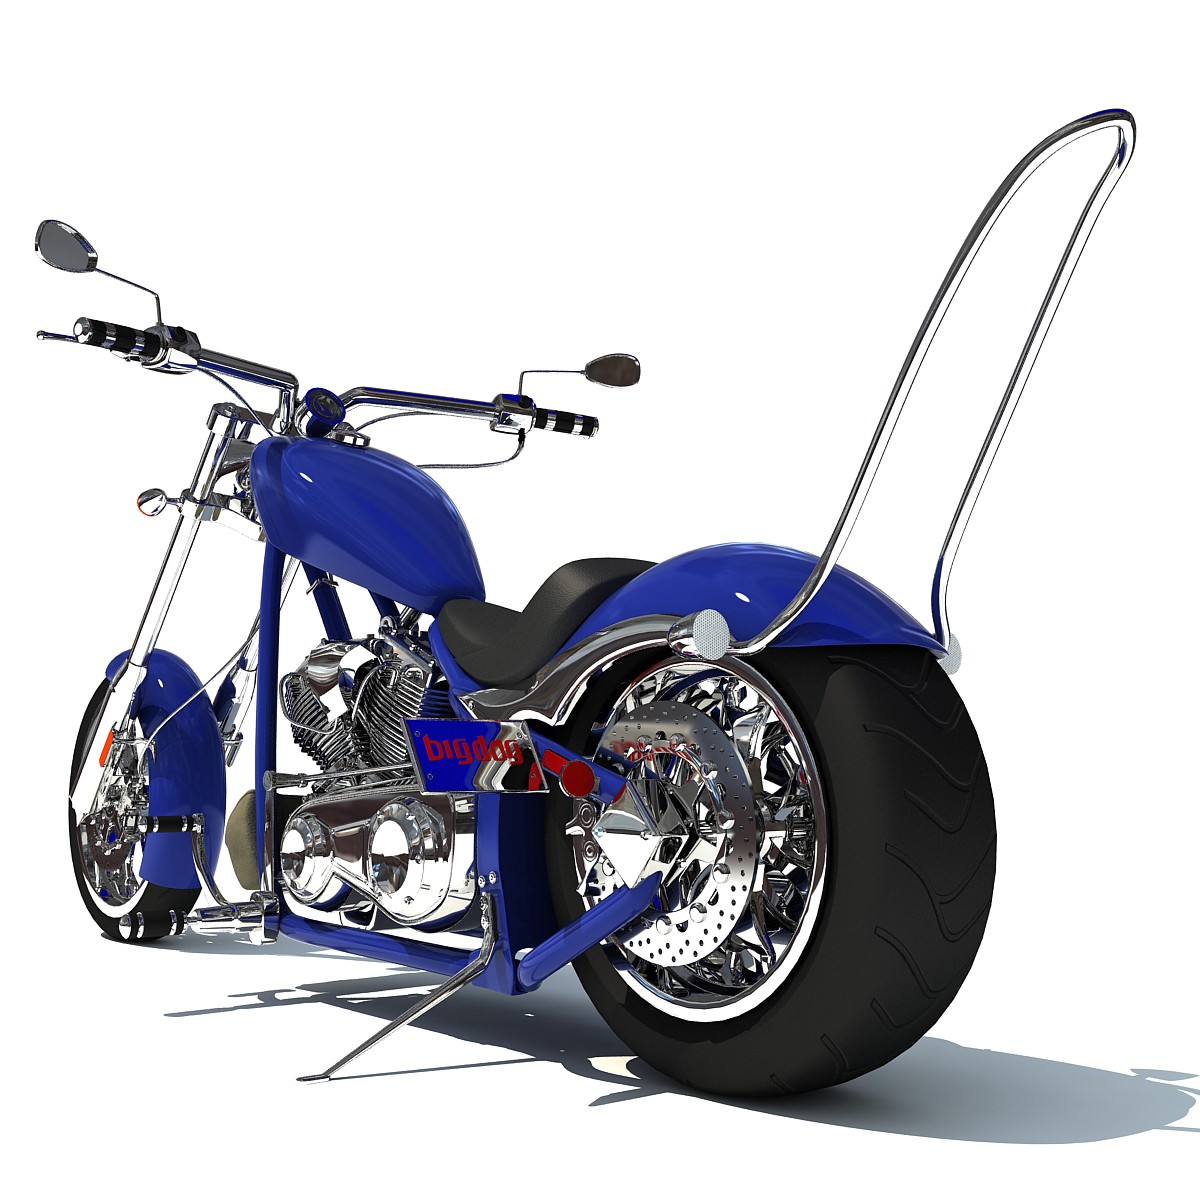 Cartoon Pictures Of Motorcycles - Clipart library